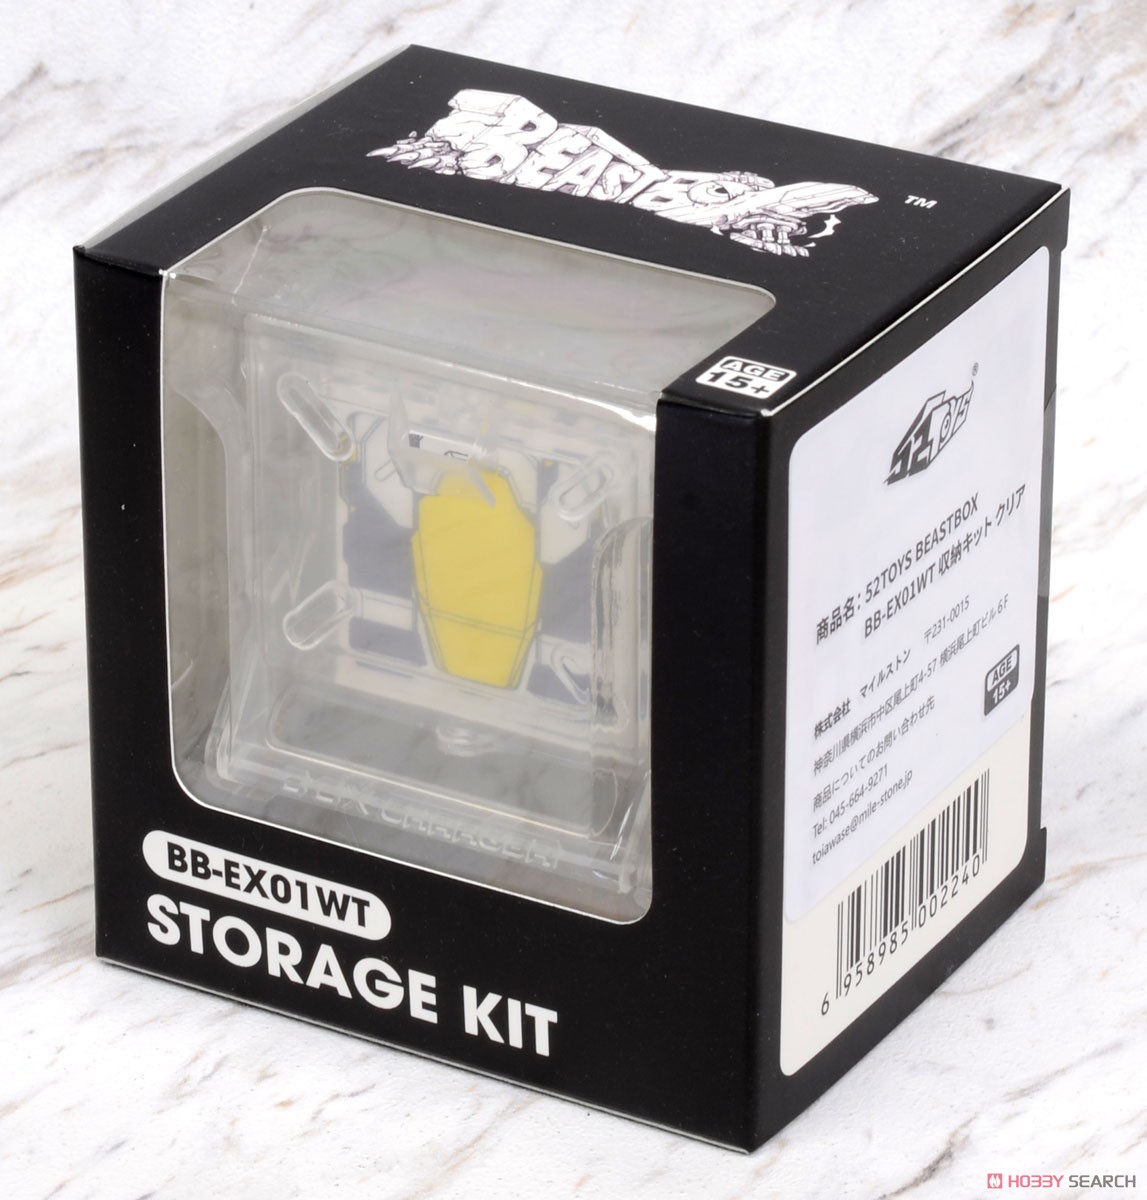 BeastBox BB-EX01WT Storage Kit Clear (Character Toy) Package1